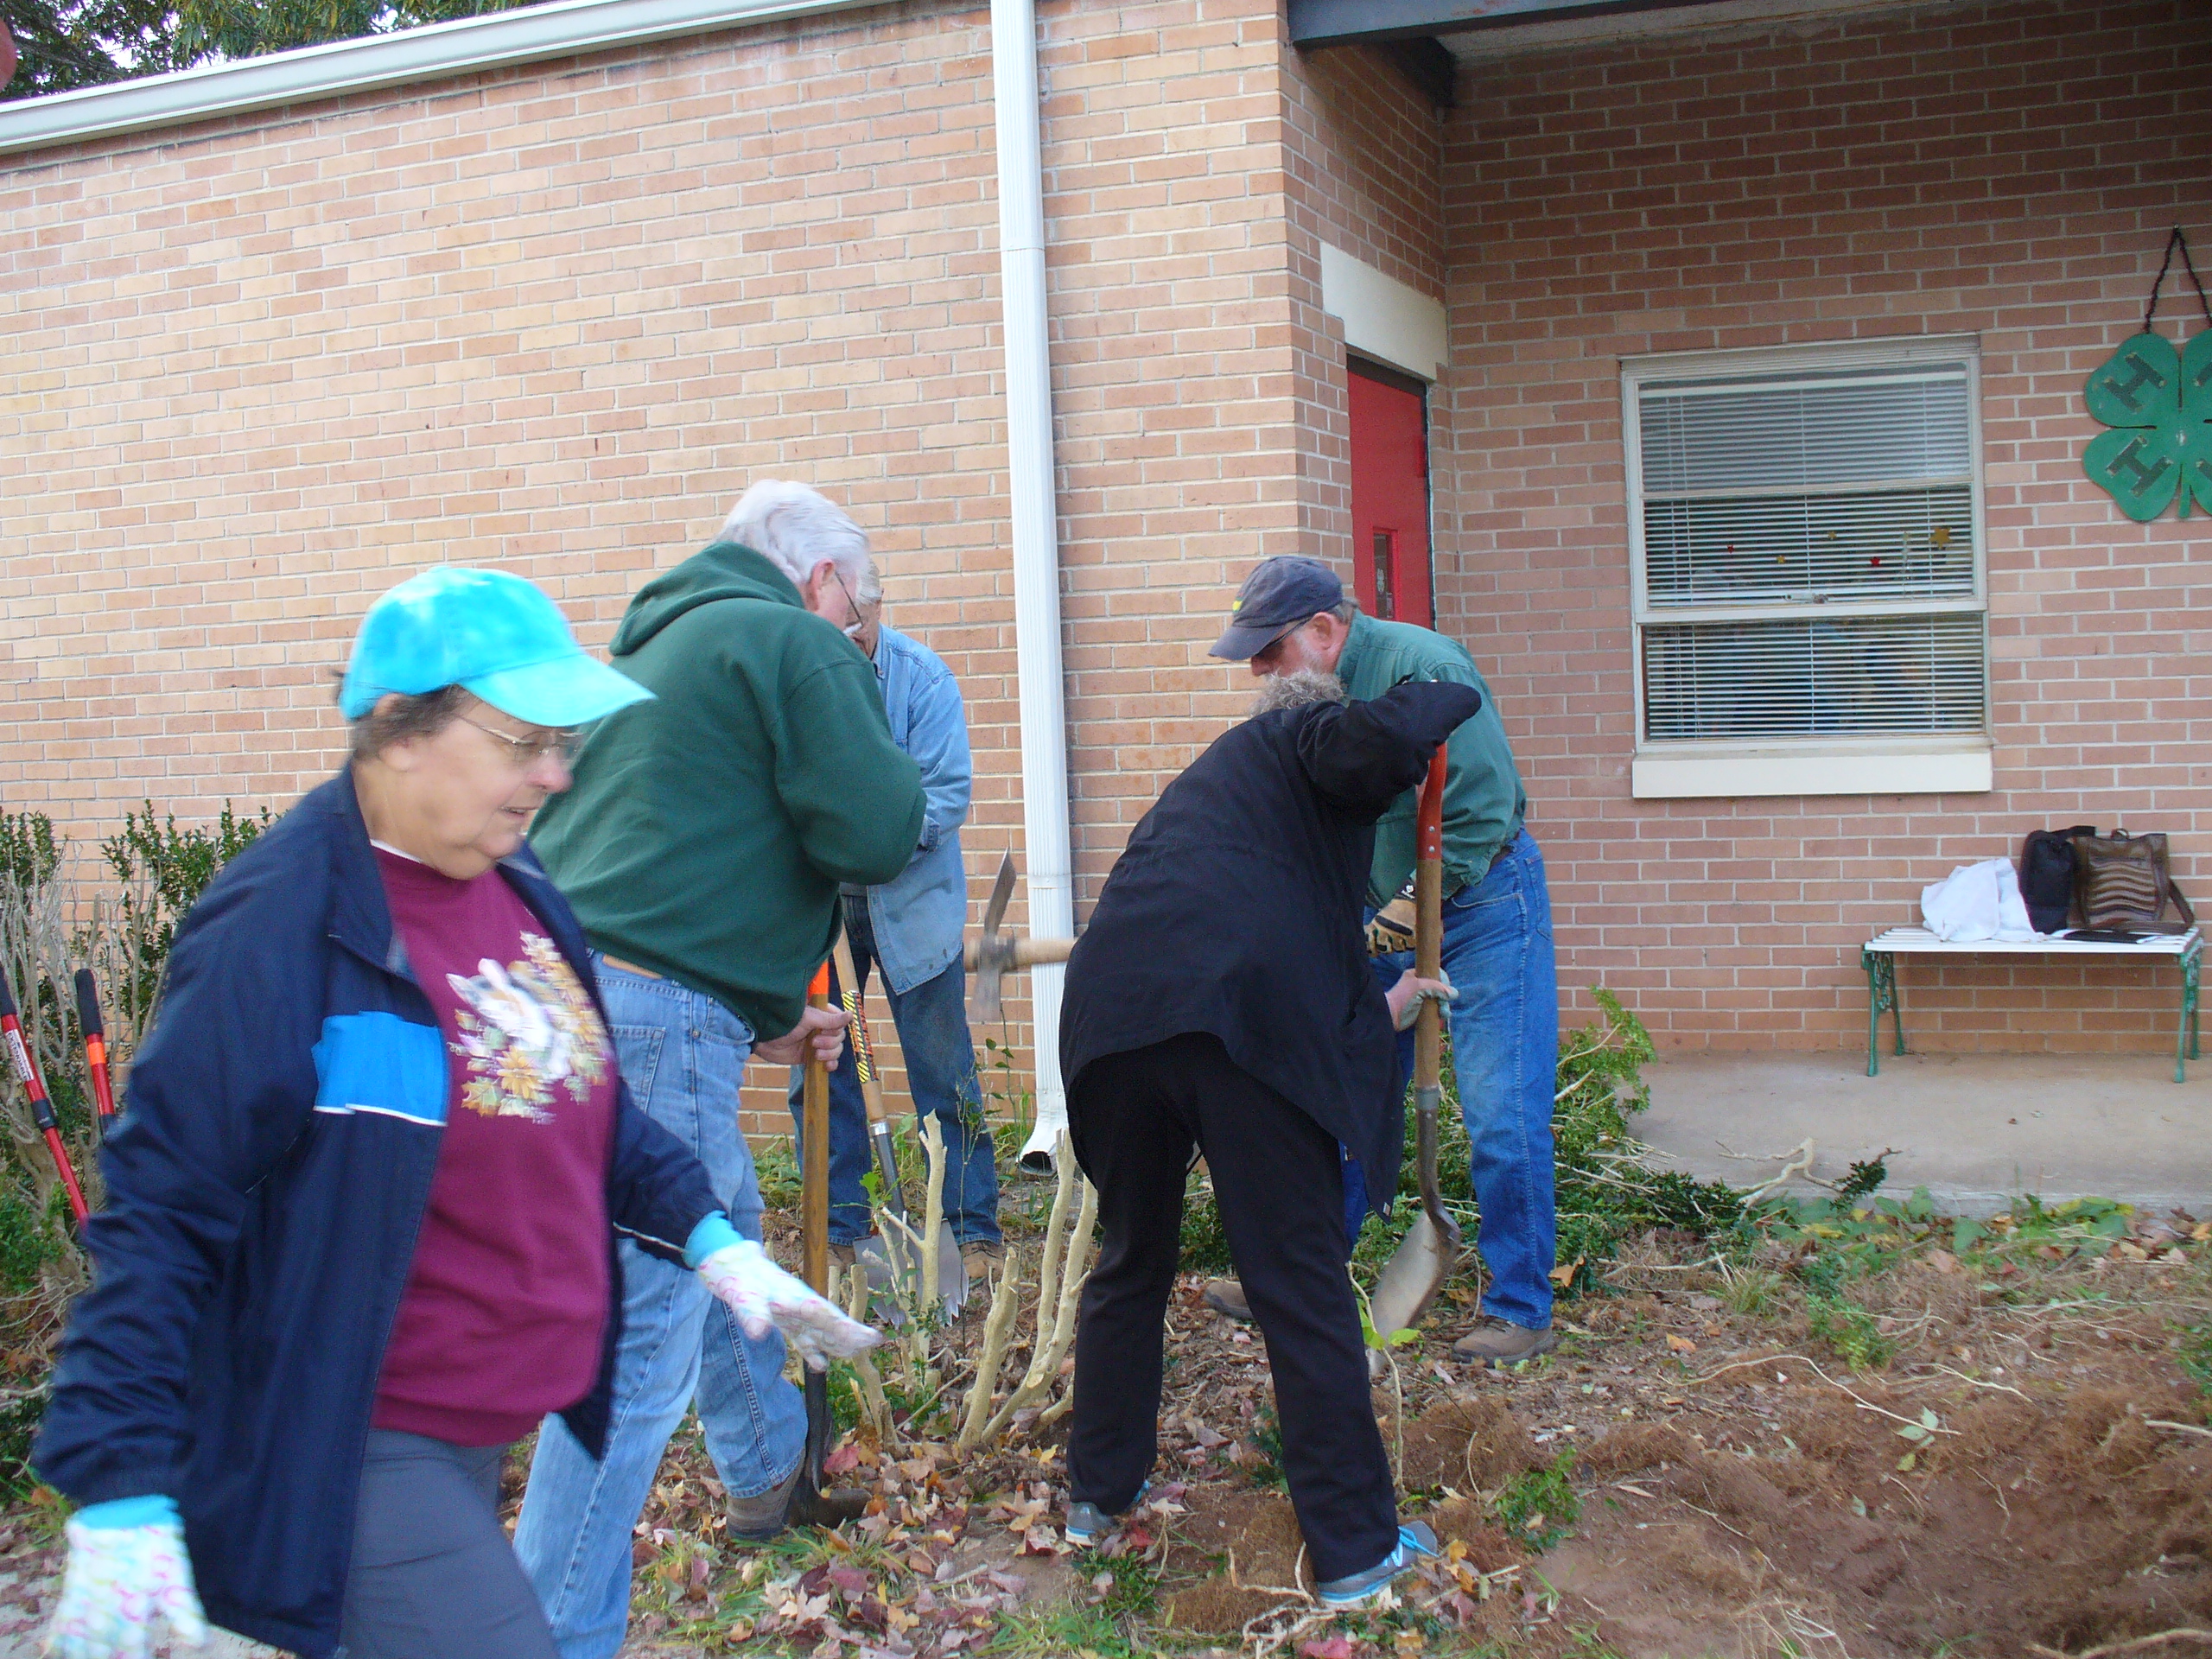 Master Gardener Extension volunteers dig up bushes from a landscaping bed